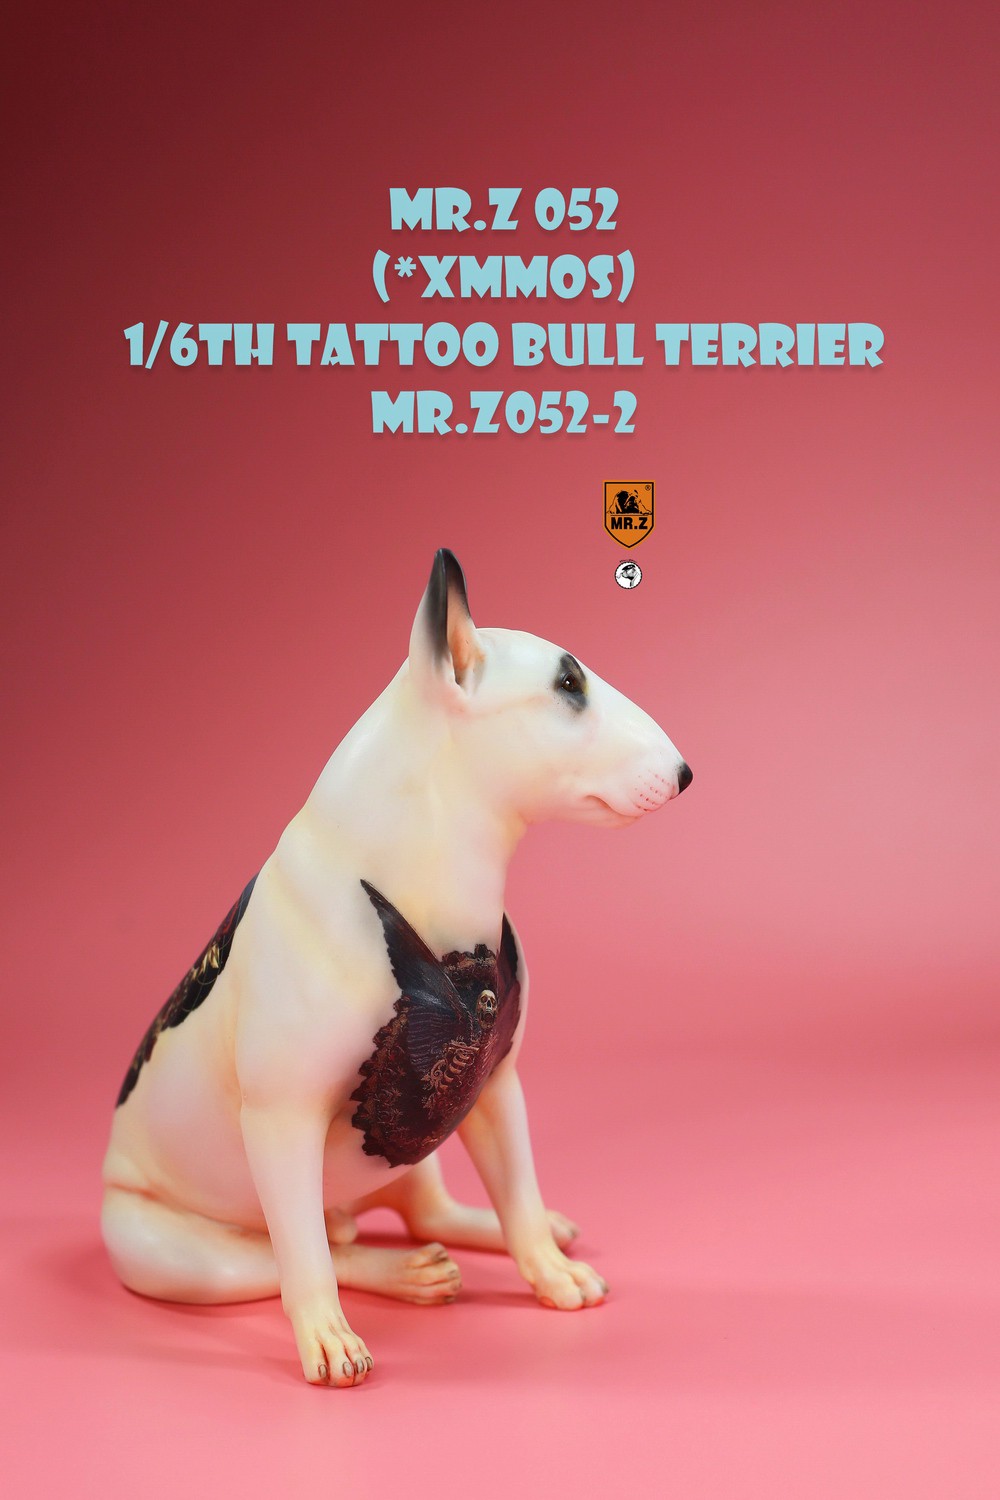 Tattoo - NEW PRODUCT: Mr.Z model: 1/6 simulation animal model No. 52-Tattoo Bull Terrier (all 5 colors) 22283310